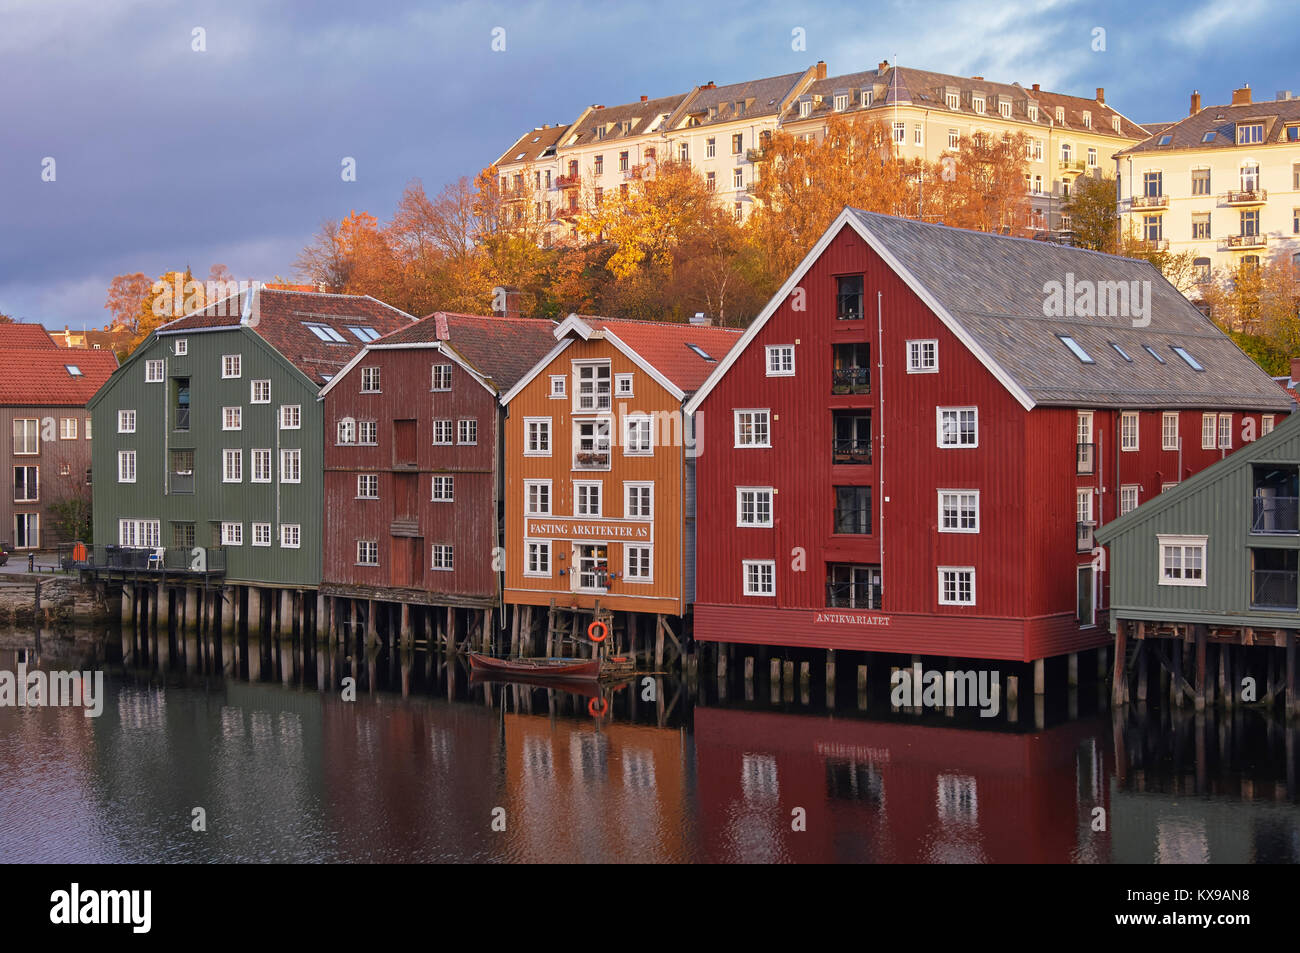 Restored and converted storehouses along the River Nidelva, Trondheim, Sor-Trondelag, Norway Stock Photo